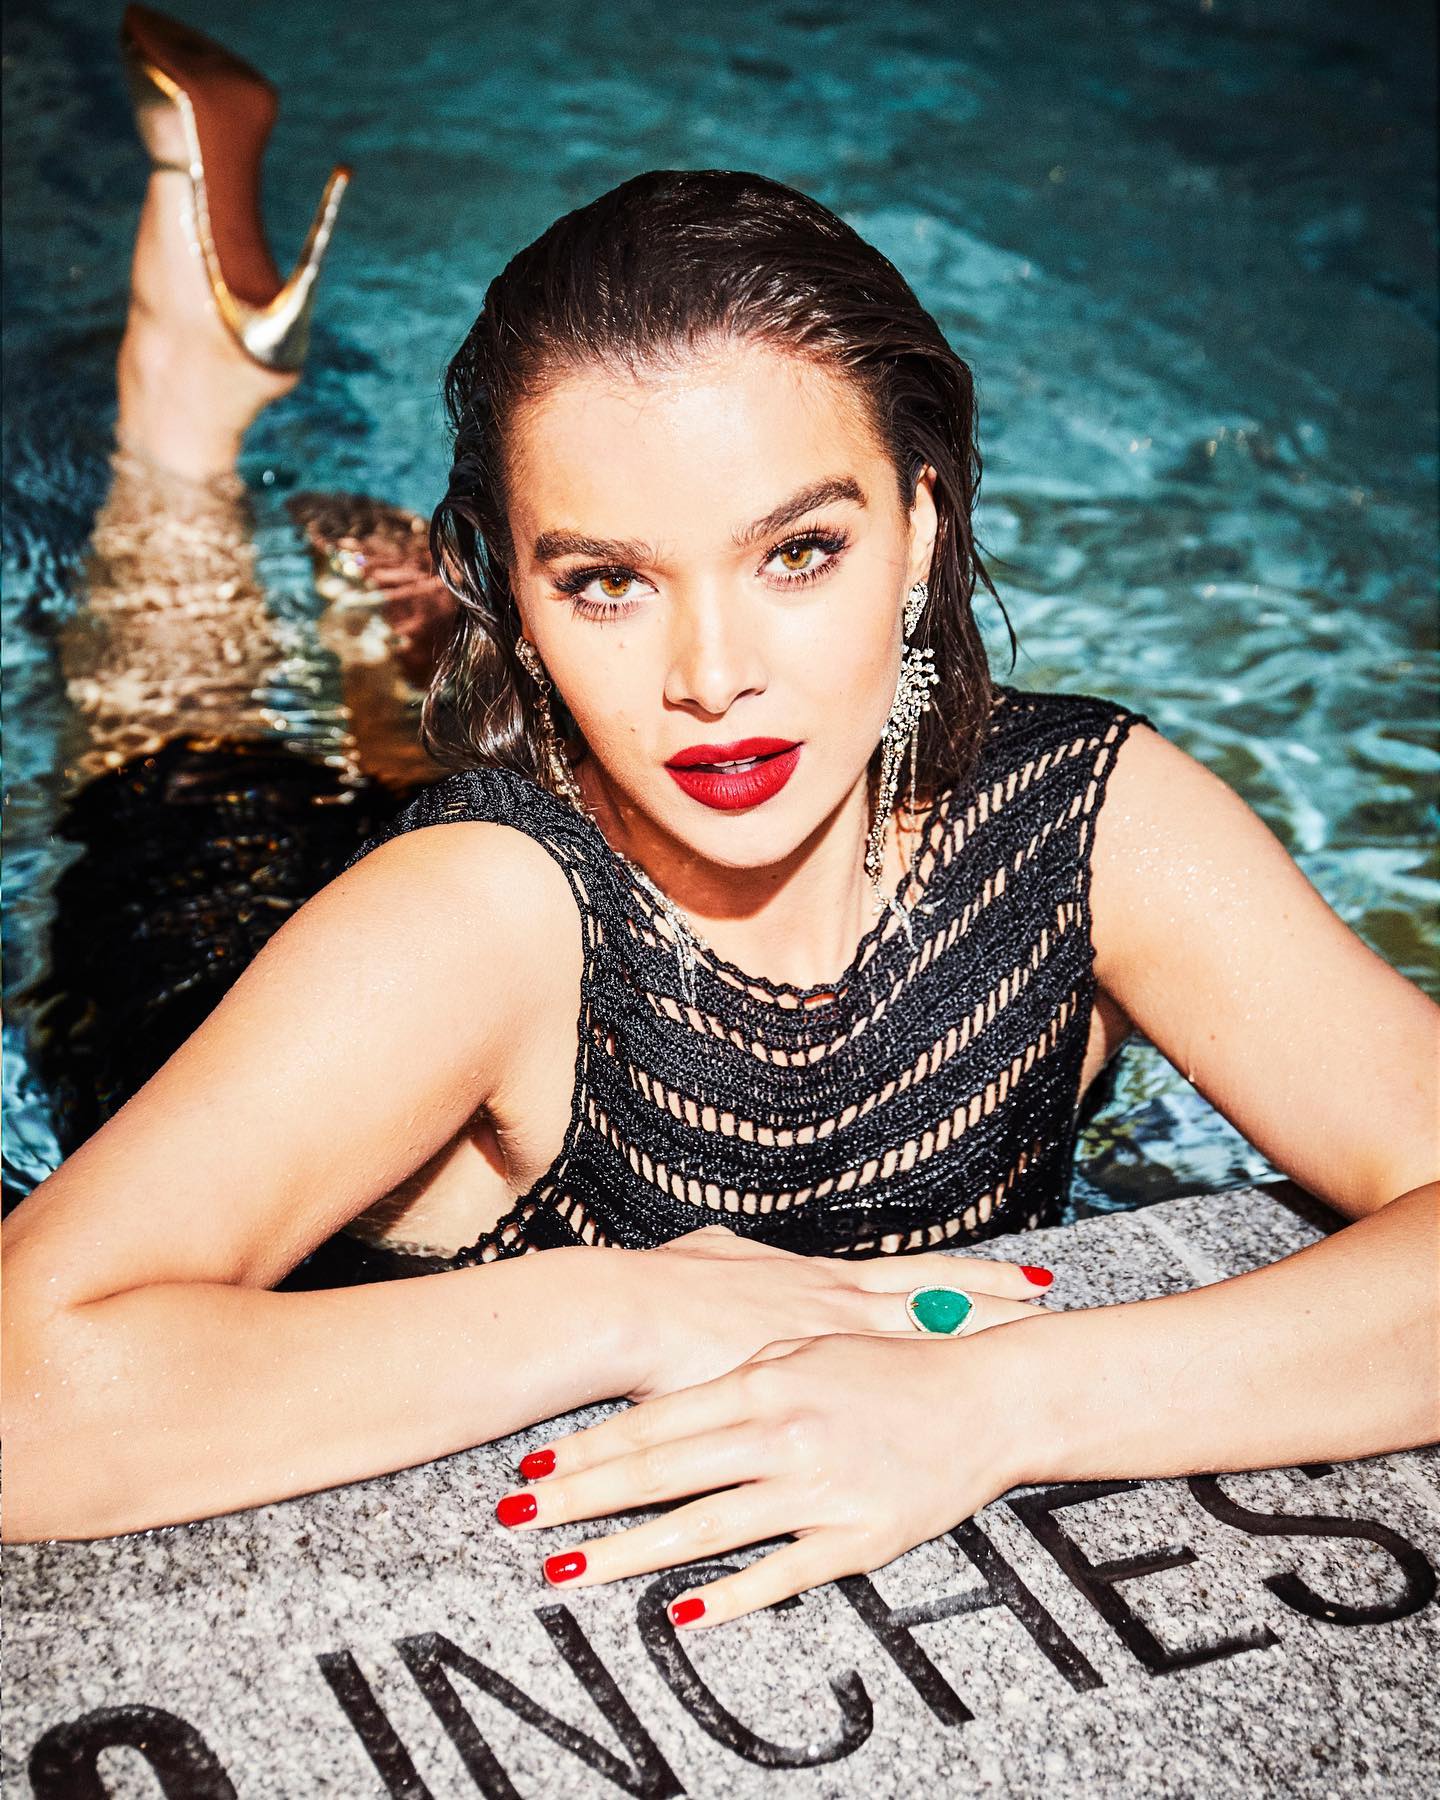 Behind the Scenes With Hailee Steinfeld! - Photo 3